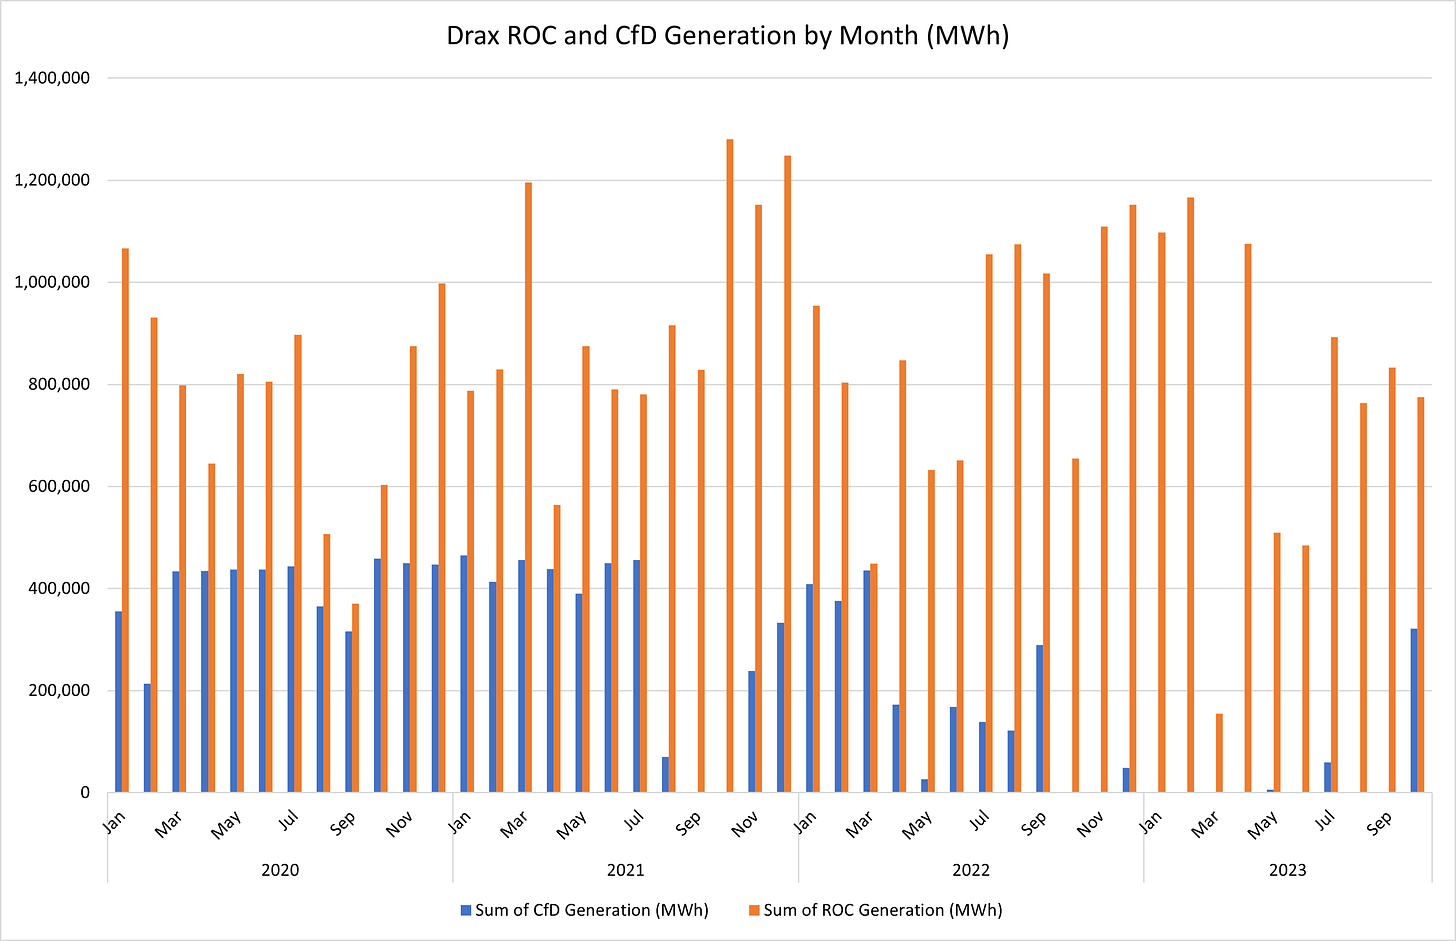 Figure 4 - Drax ROC and CfD Generation by Month (MWh)